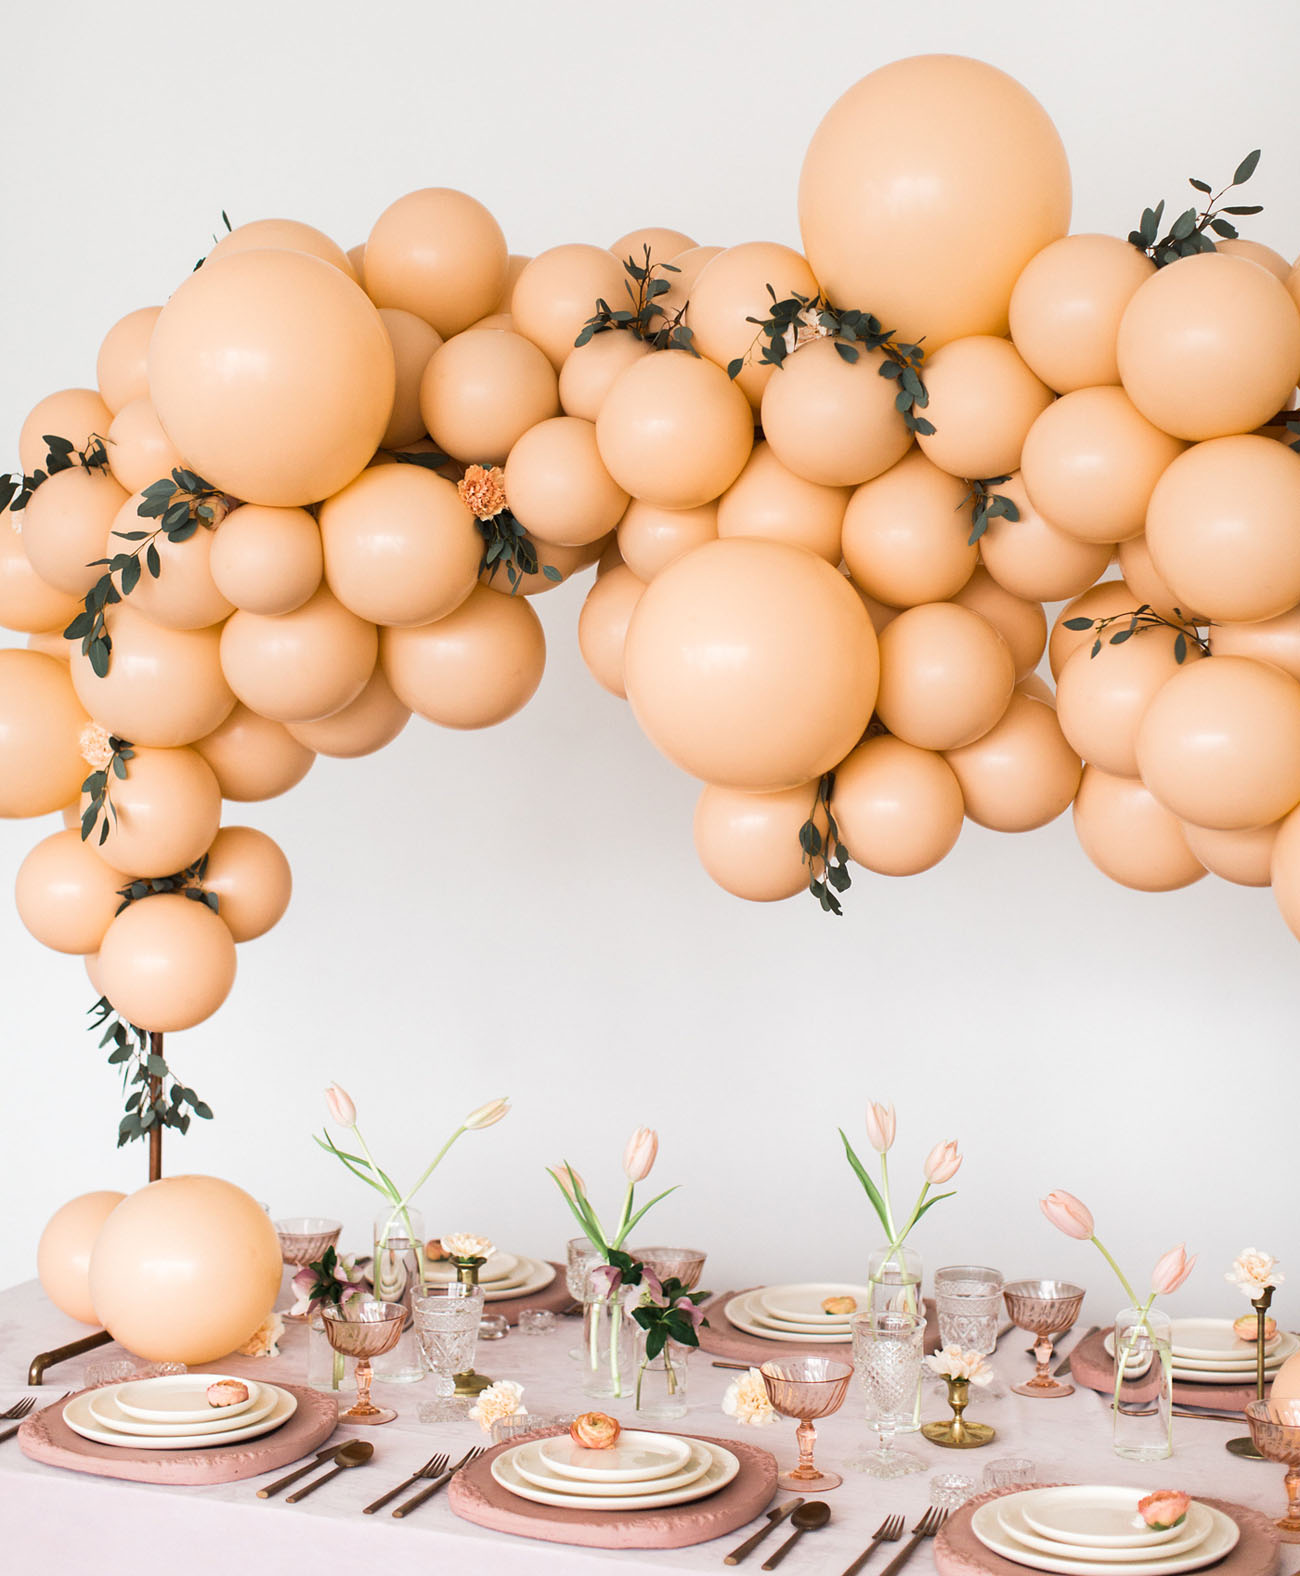 How to decorate with colored balloons